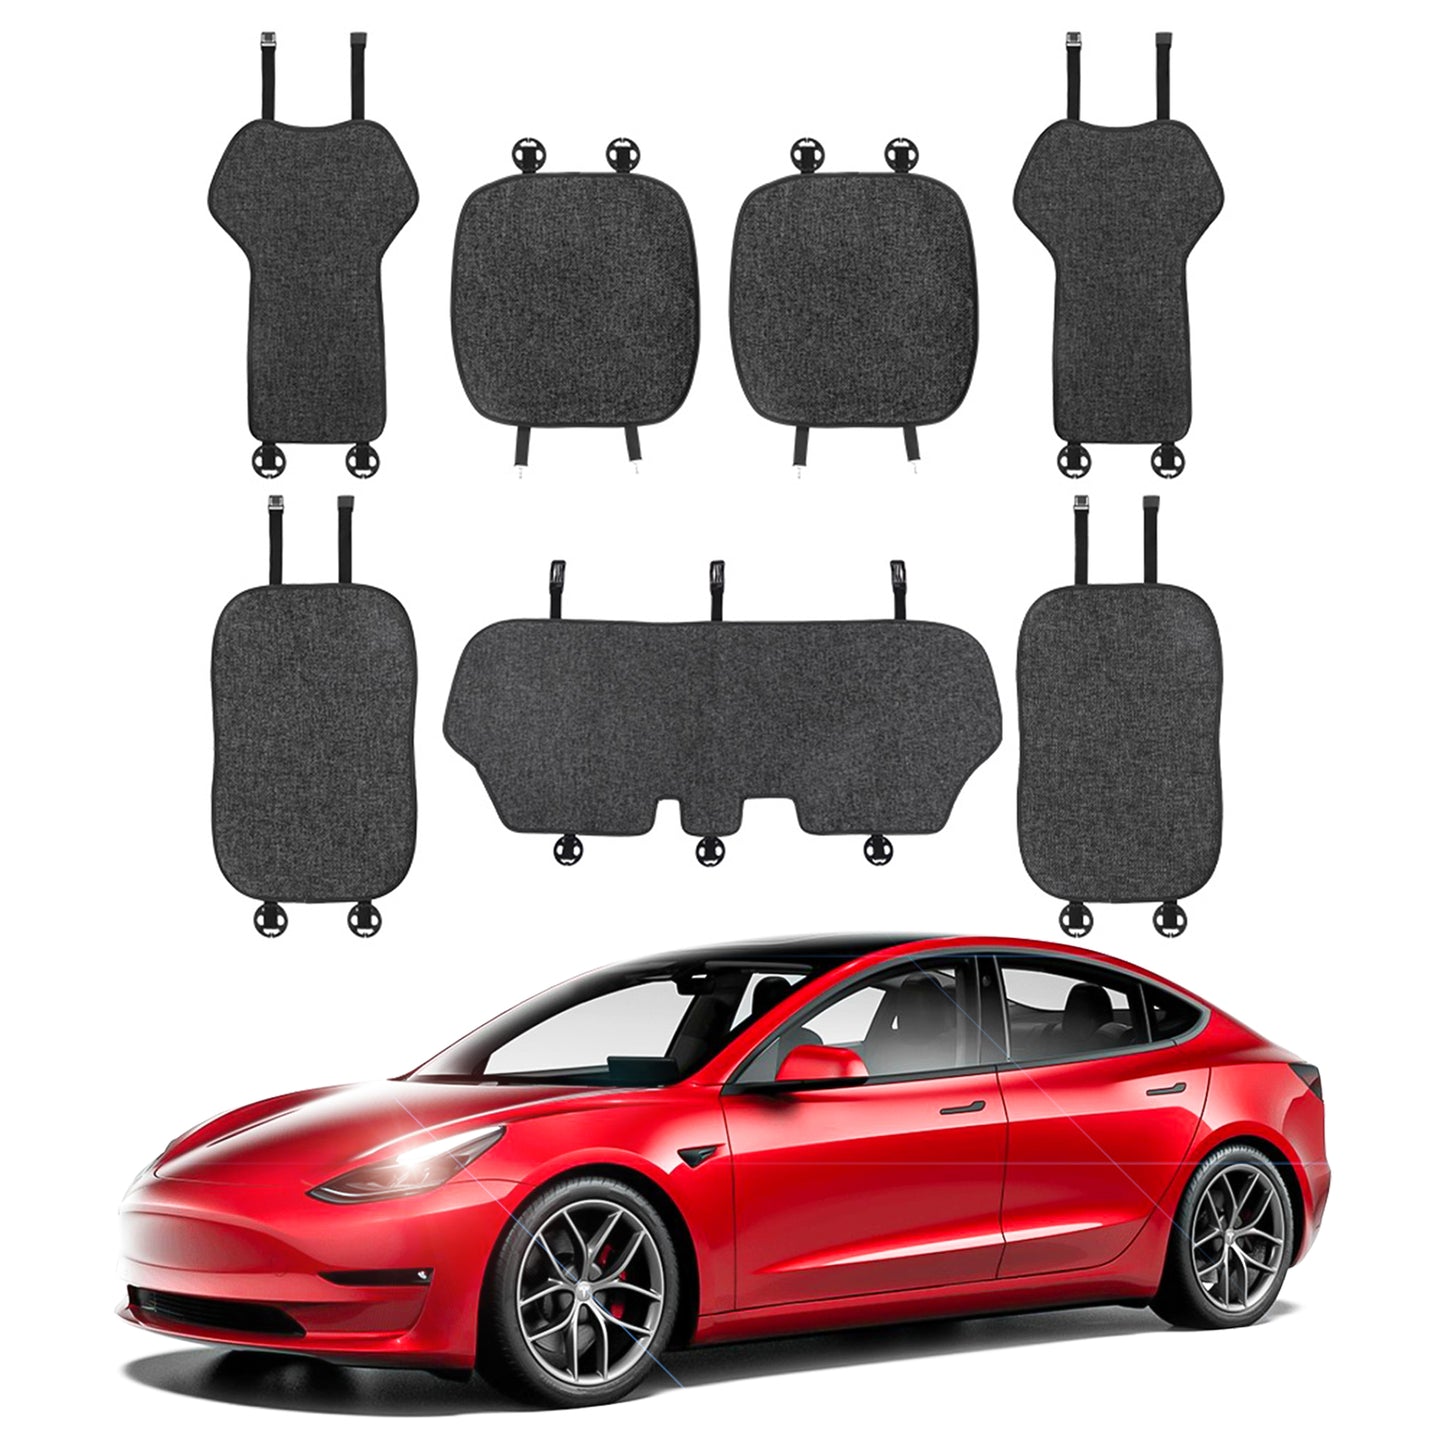 seat cushion cuhions linen summer mat front rear back pieces 3 4 7 washable tesla model 3 Y car 2022 2023 2021 2020 2019 2018 s3xy arcoche accessories accessory aftermarket price Vehicles standard long range performance sr+ electric car rwd ev interior exterior diy decoration price elon musk must have black grey